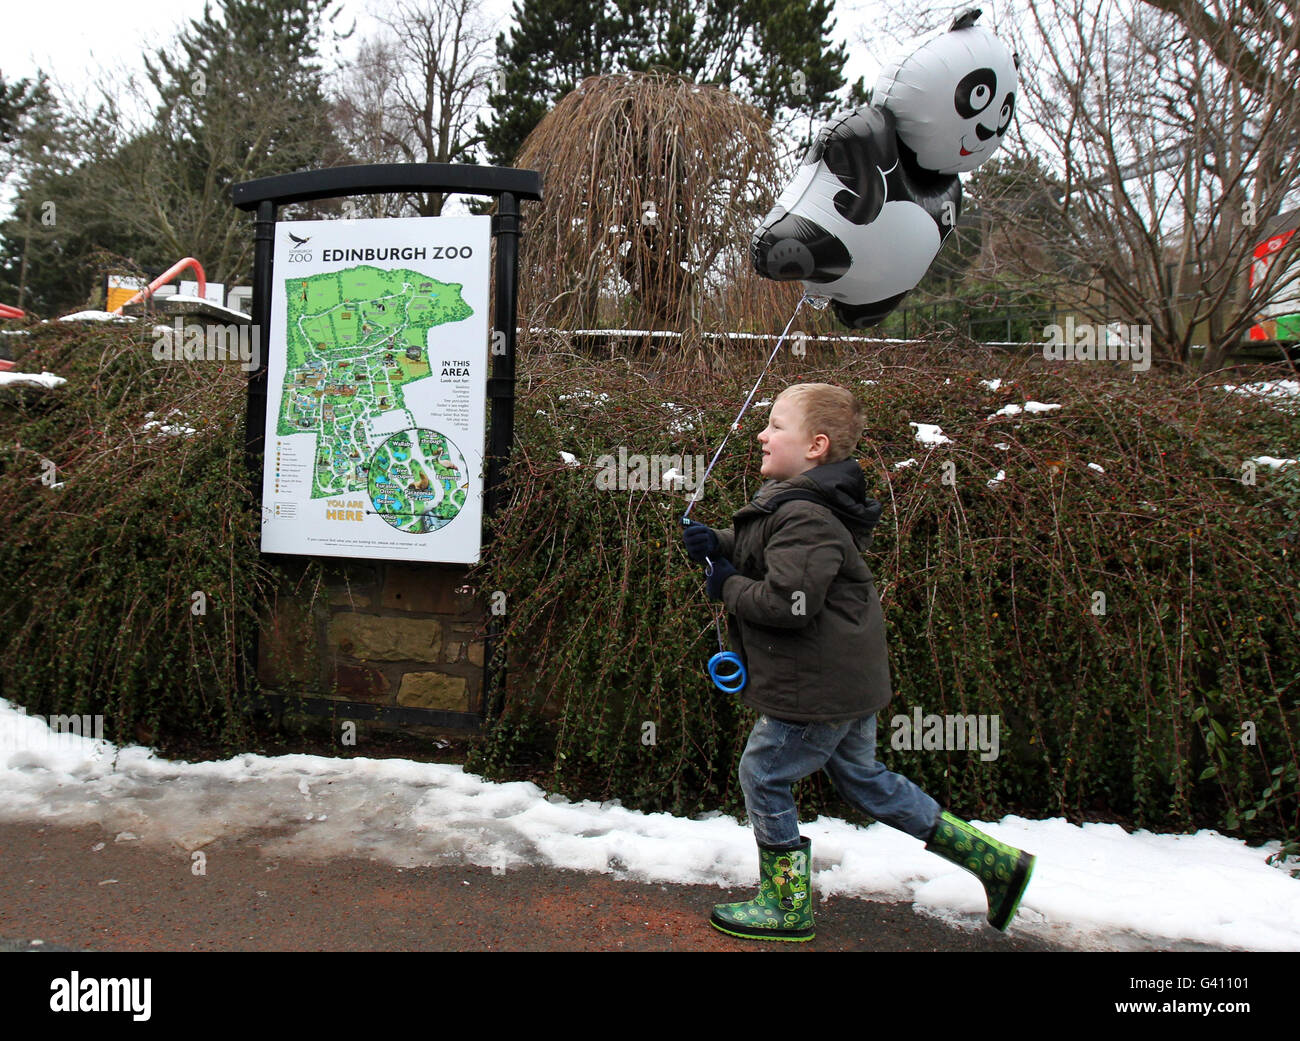 5-year-old Josh Gibson holds a giant panda balloon at Edinburgh Zoo, after it was announced giant pandas Tian Tian and Yangguang, a breeding pair born in 2003, will be coming to Edinburgh Zoo. Stock Photo